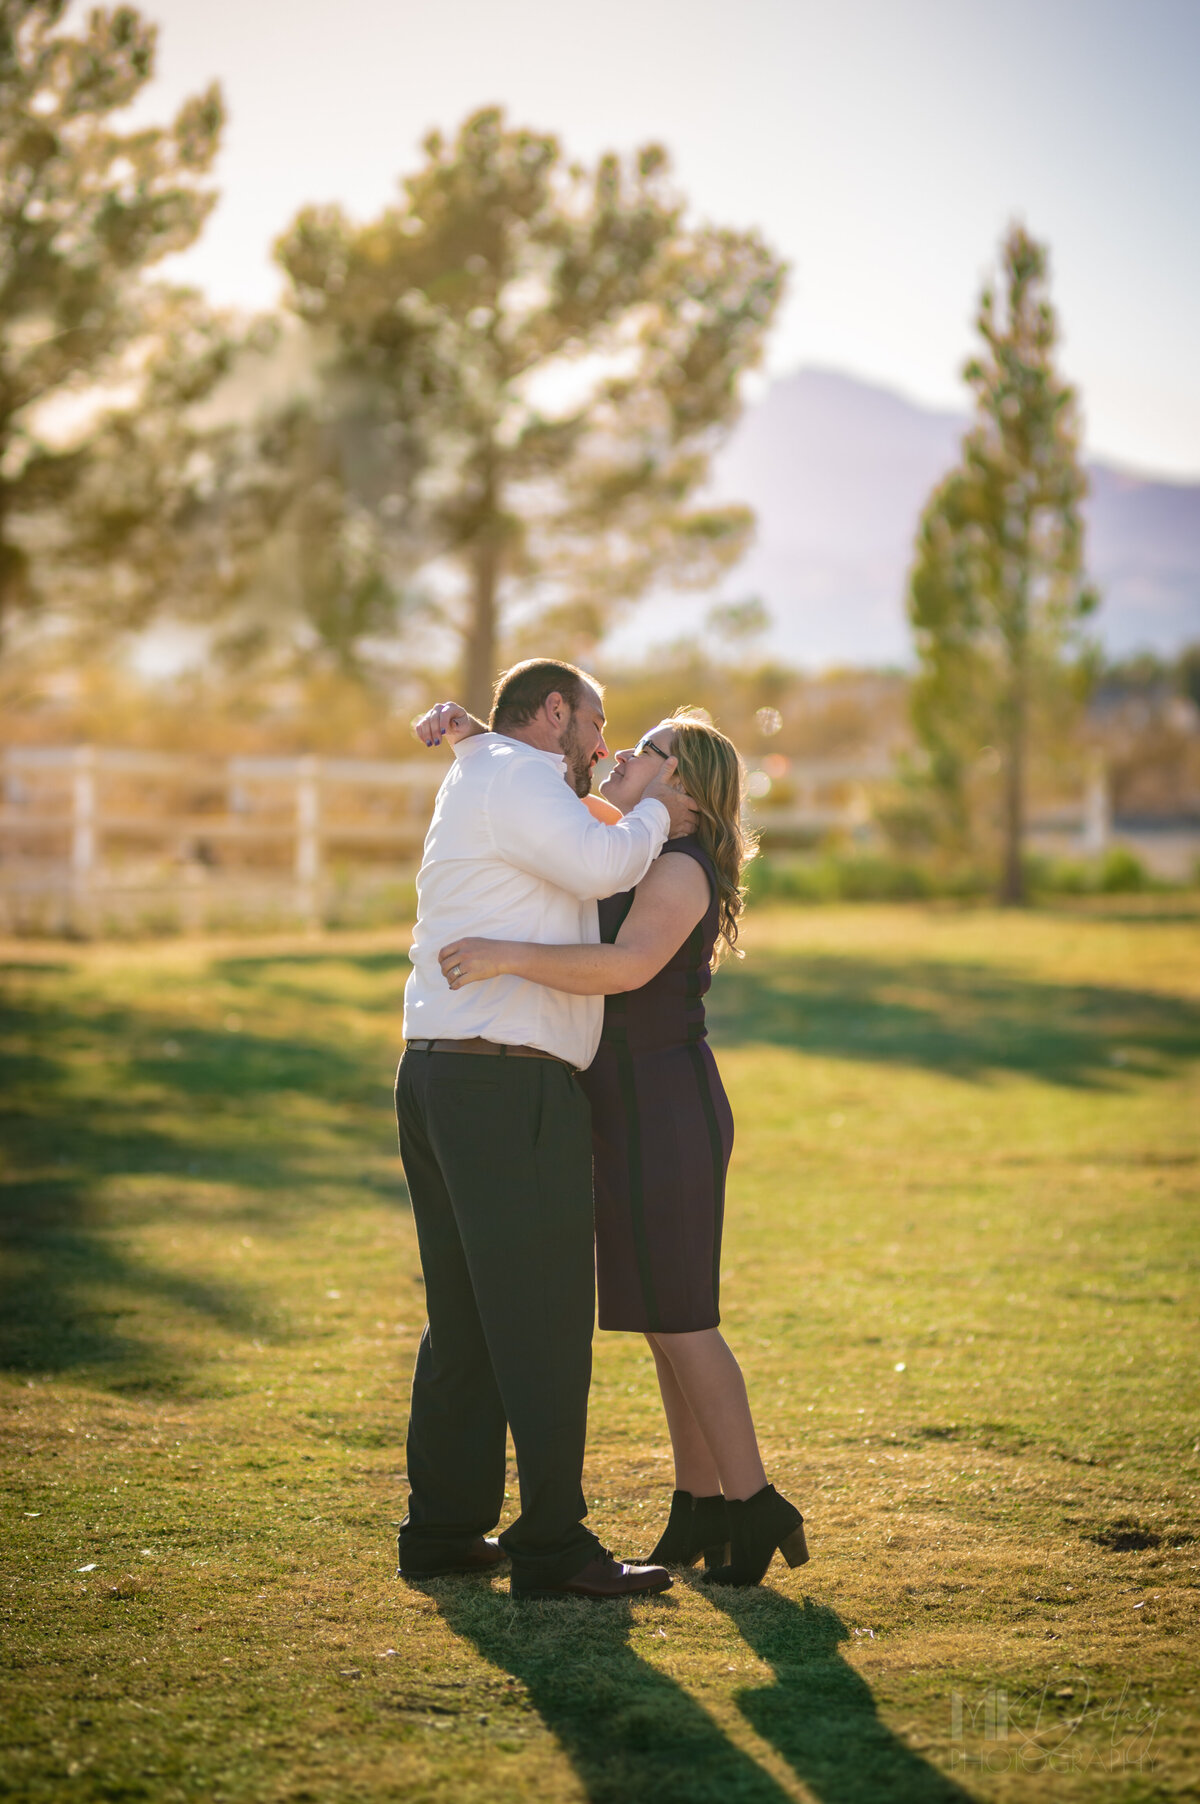 Bride and groom in teh park at golden hour casual elopement second marriage married on birthday groom pulls bride in for a kiss by the back of her neck Dry lake Bed elopement Blue Suit on Groom  flowers by michelle  bride in cream color wedding dress with deep  plunging  neckline mountain skyline  sunset las vegas wedding photographers mk delacy photography